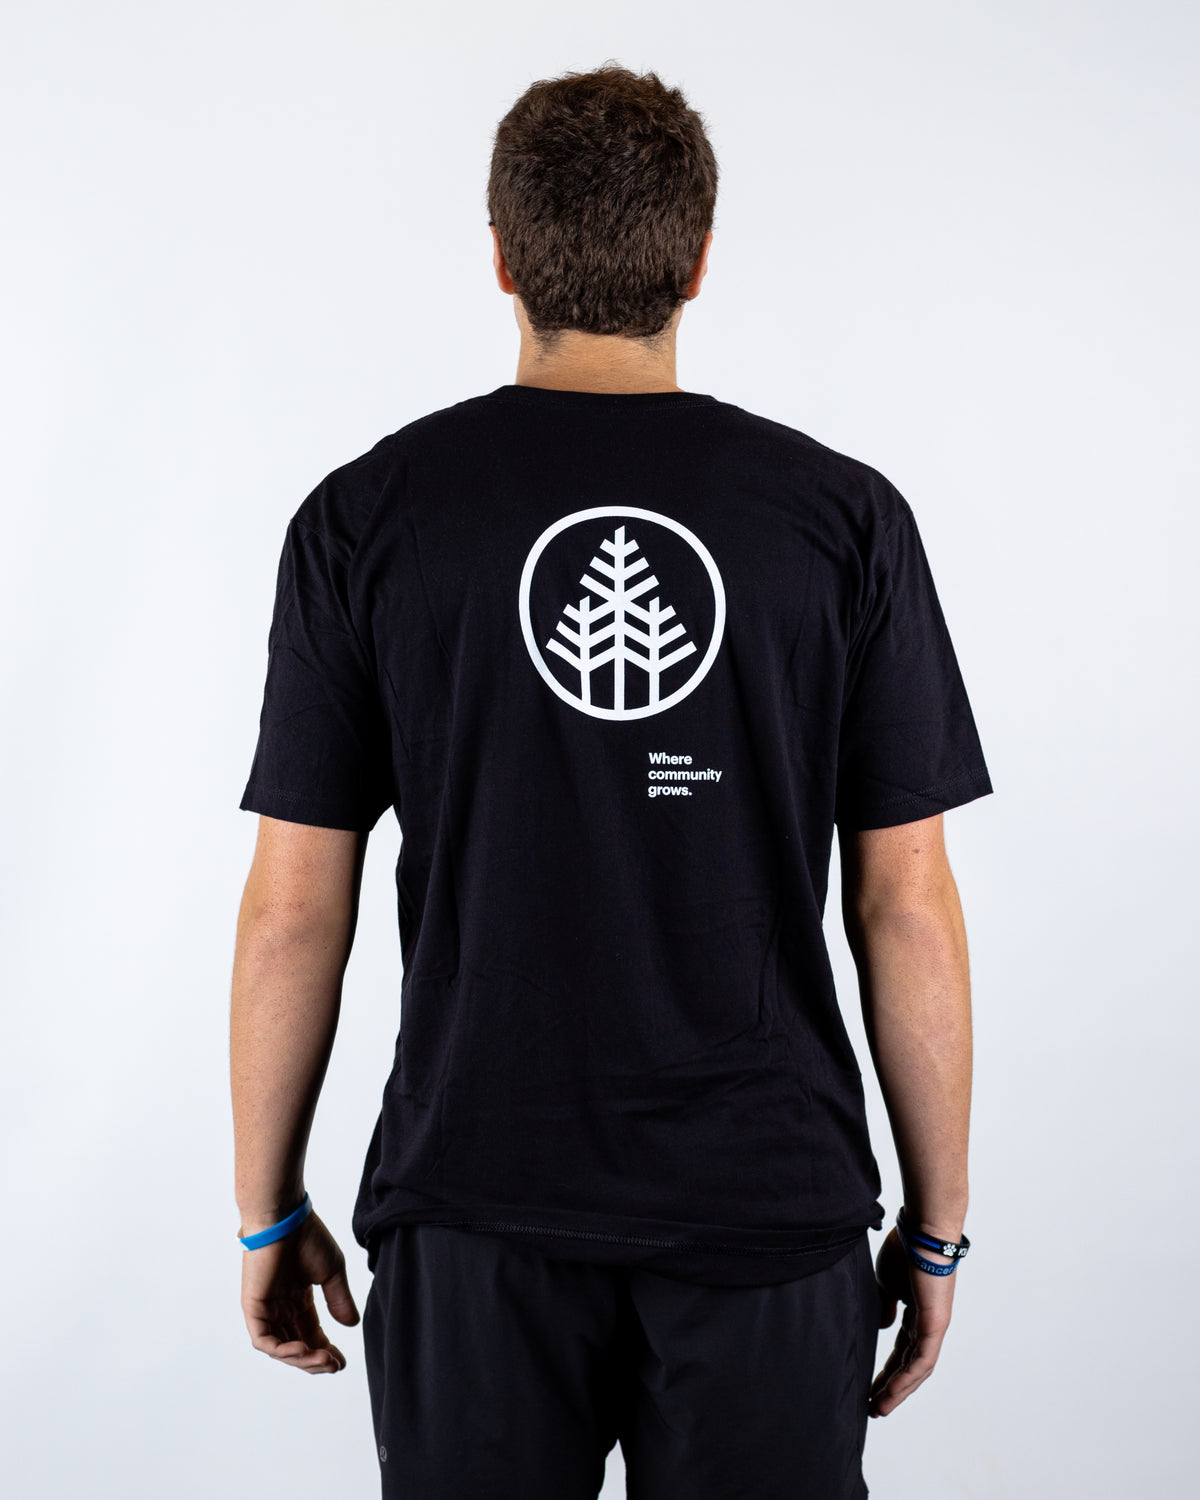 Black T Shirt with Tree Stamp; Where Community Grows